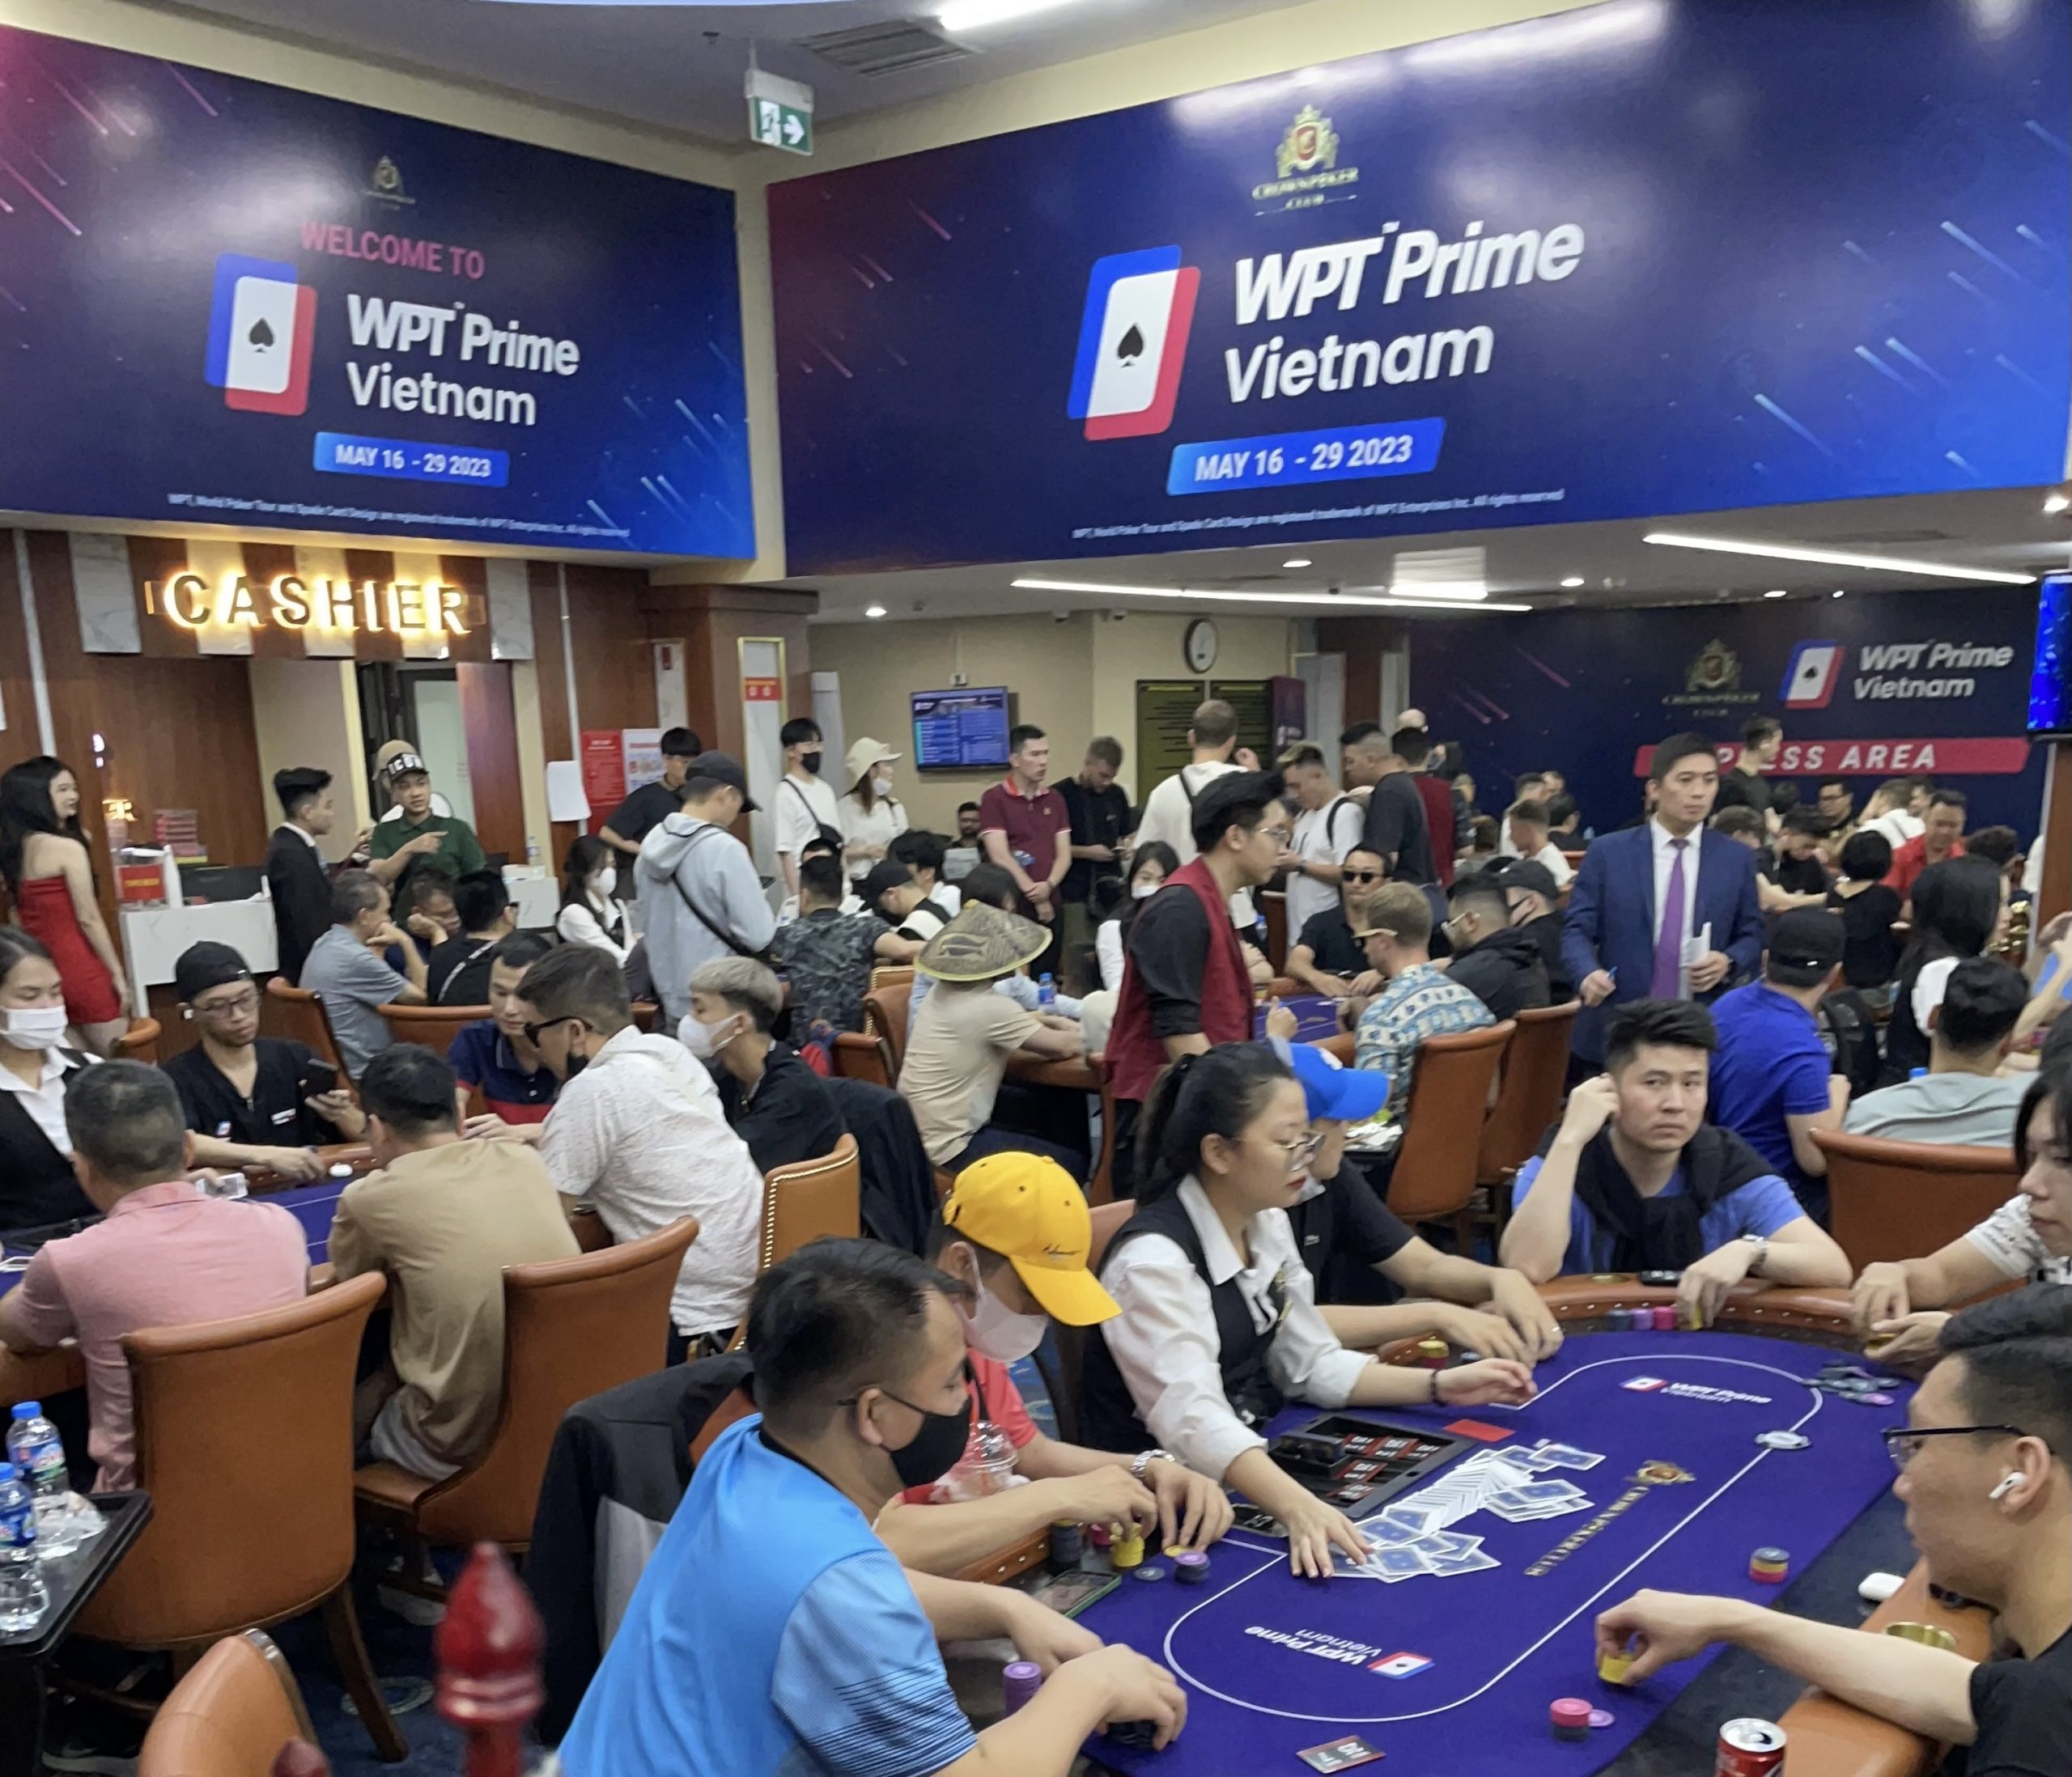 Record-Breaking Turnout at World Poker Tour Prime Vietnam Main Event; 1,151 entries, over 1M USD prize pool